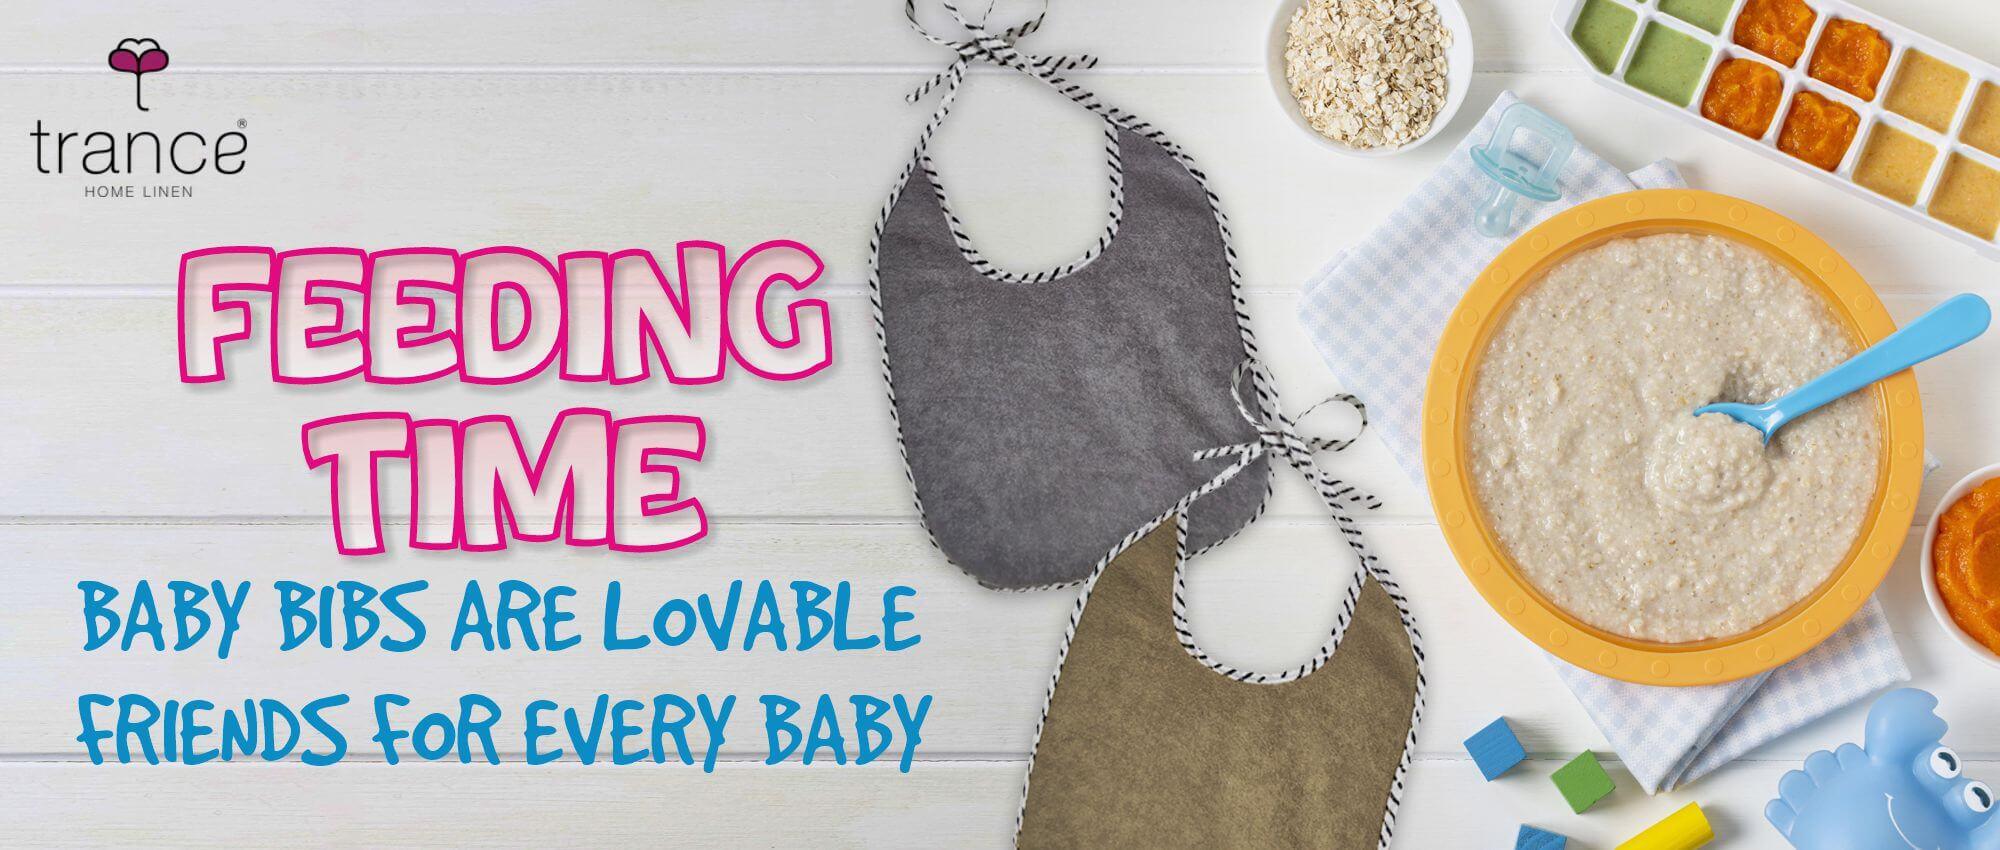 https://www.trancehomelinen.in/cdn/shop/articles/feeding-time-baby-bibs-are-lovable-friends-for-every-baby-trance-home-linen.jpg?v=1708952580